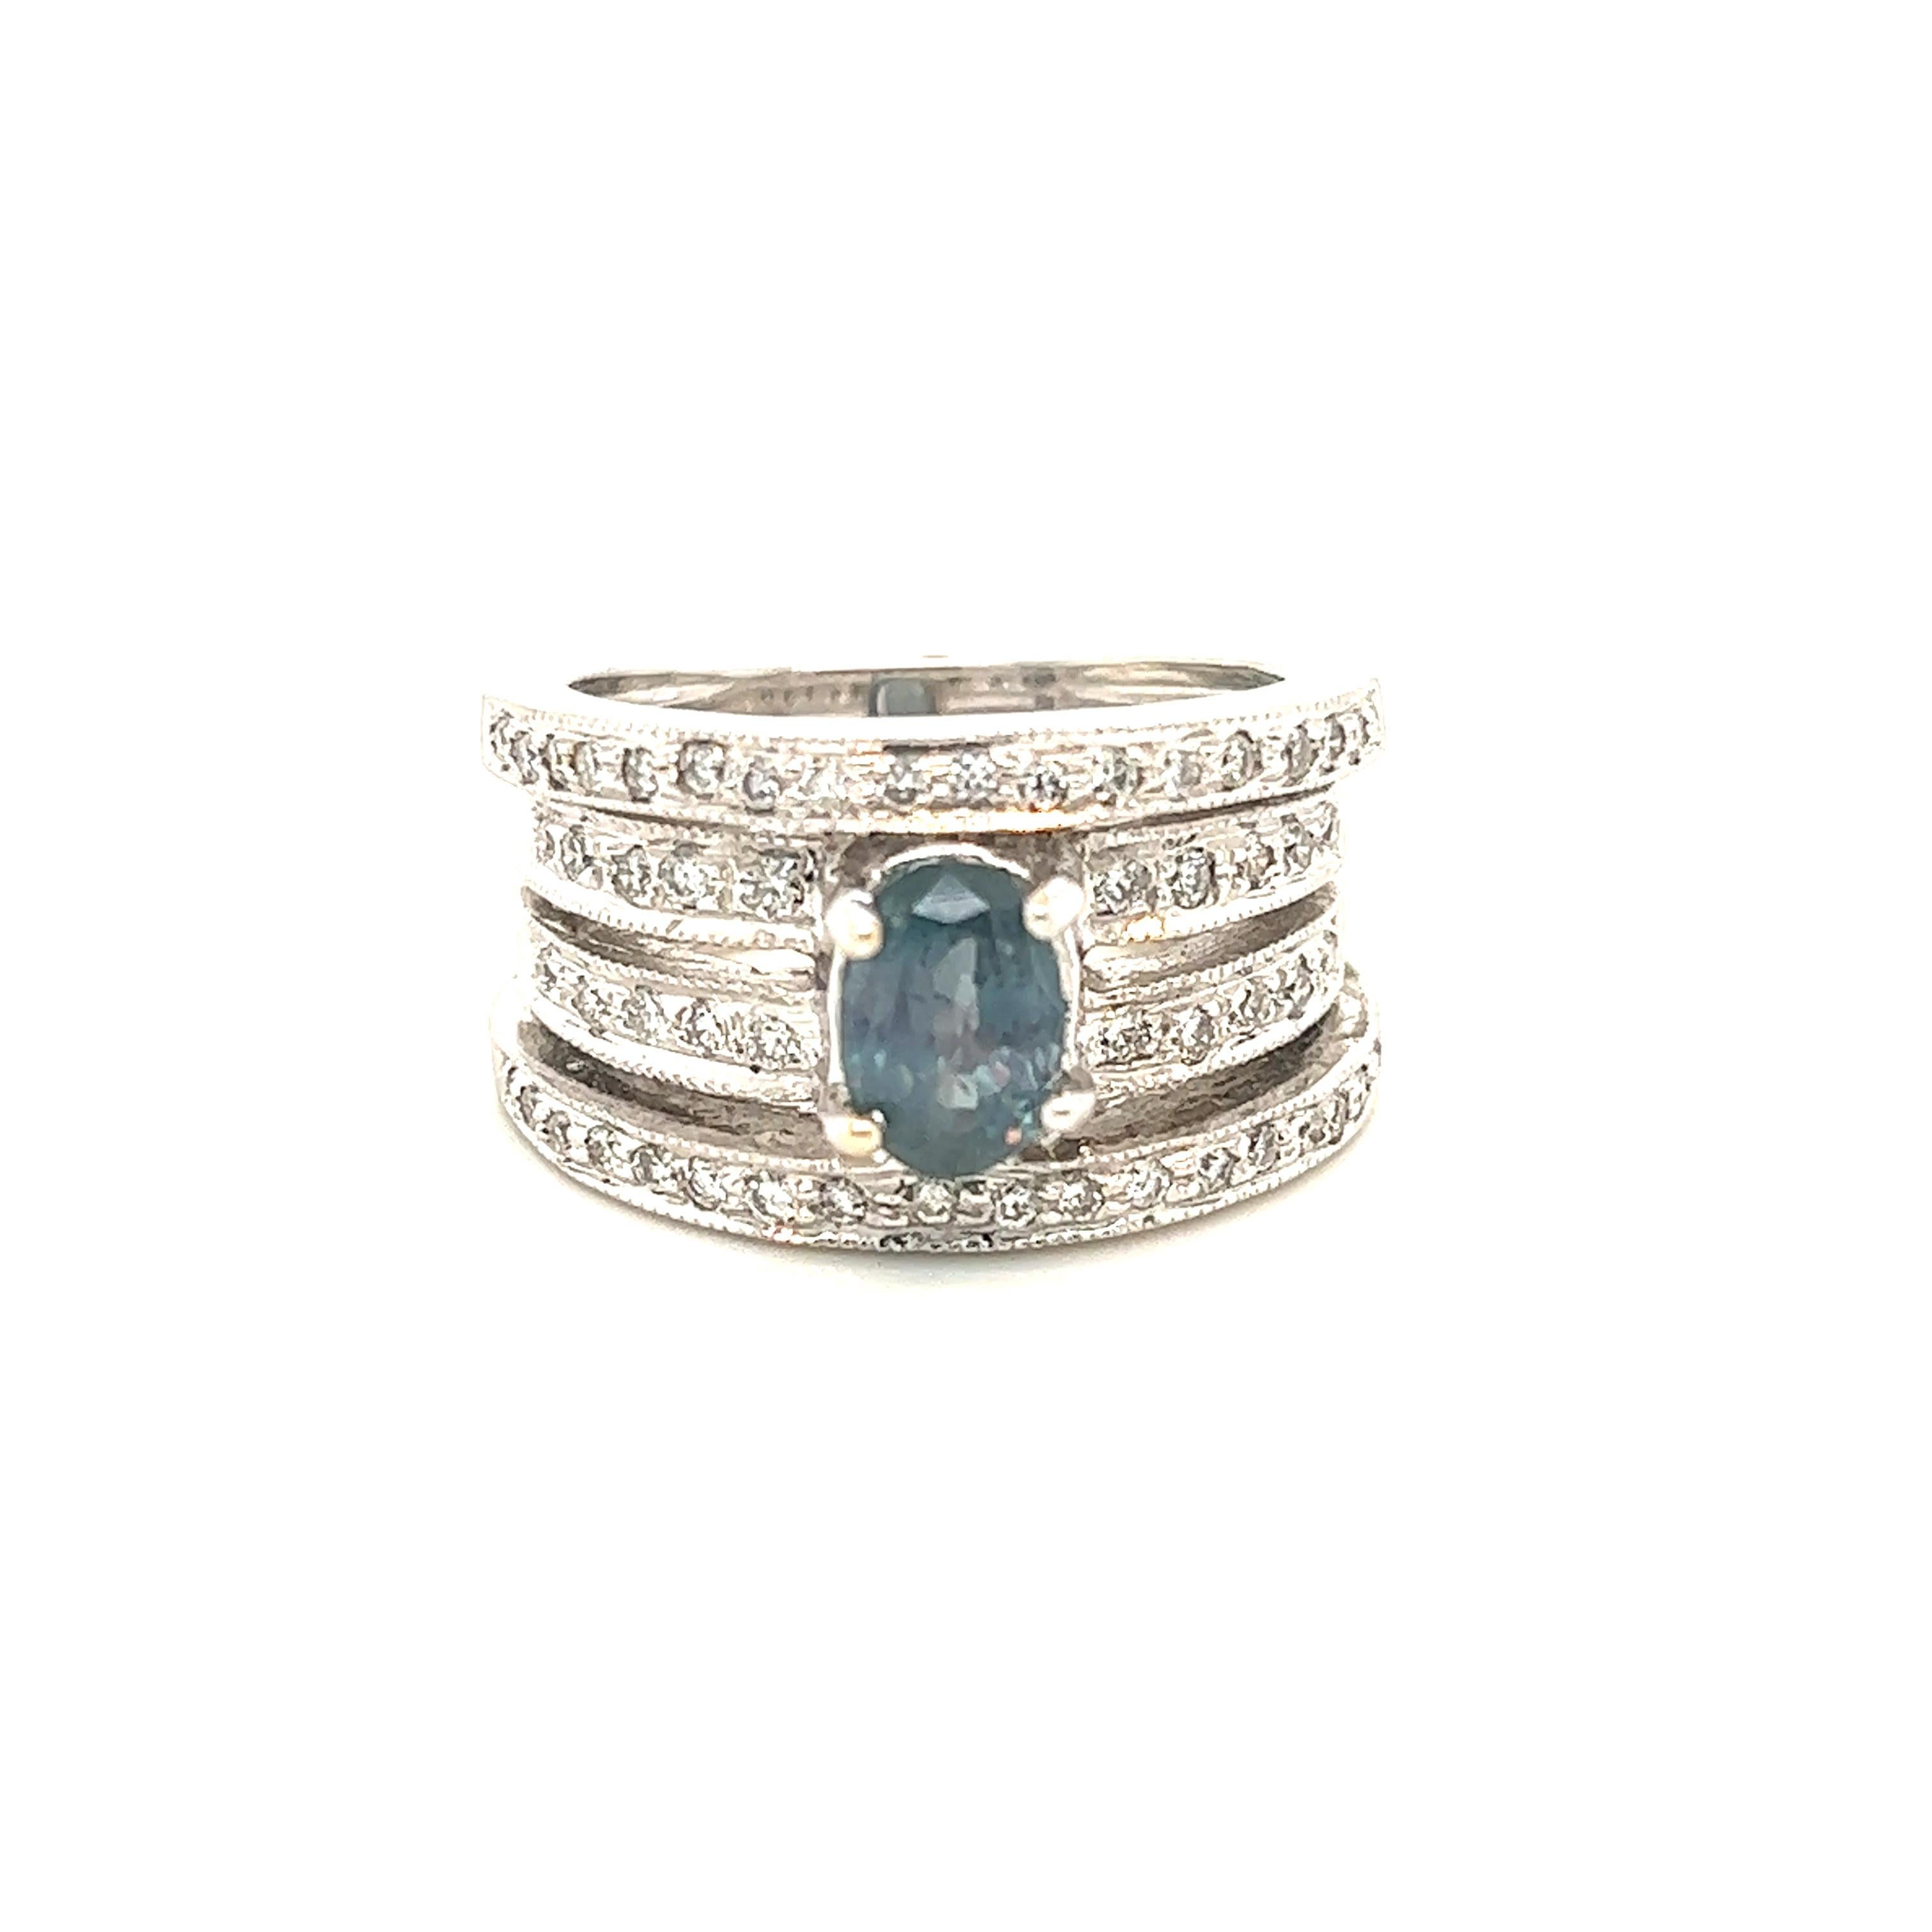 This is a gorgeous natural AAA quality oval Alexandrite surrounded by dainty diamonds that is set in a vintage white gold setting. This ring features a natural 1.71 carat oval alexandrite that is certified by the Gemological Institute of America